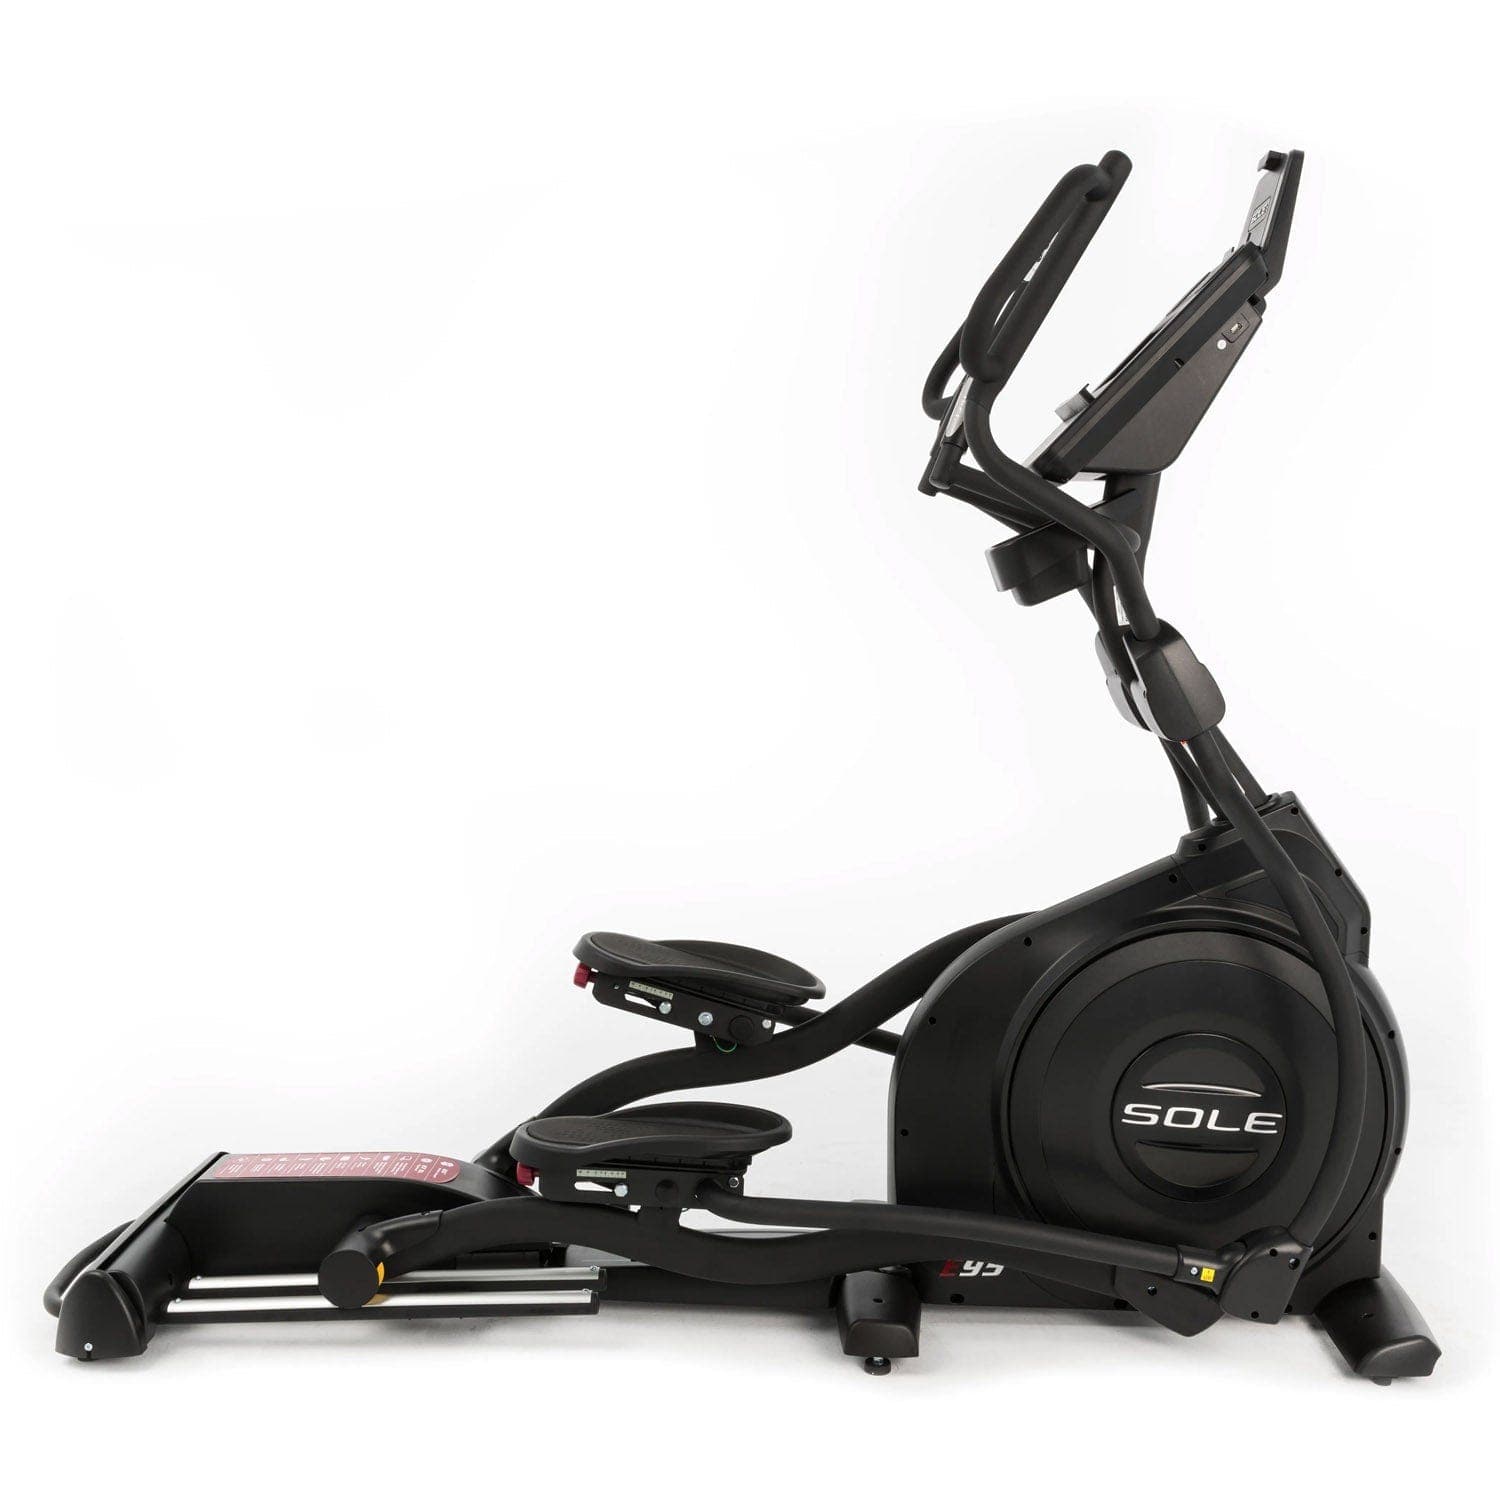 ARGT Sole Fitness E95 Home Use Elliptical Trainer